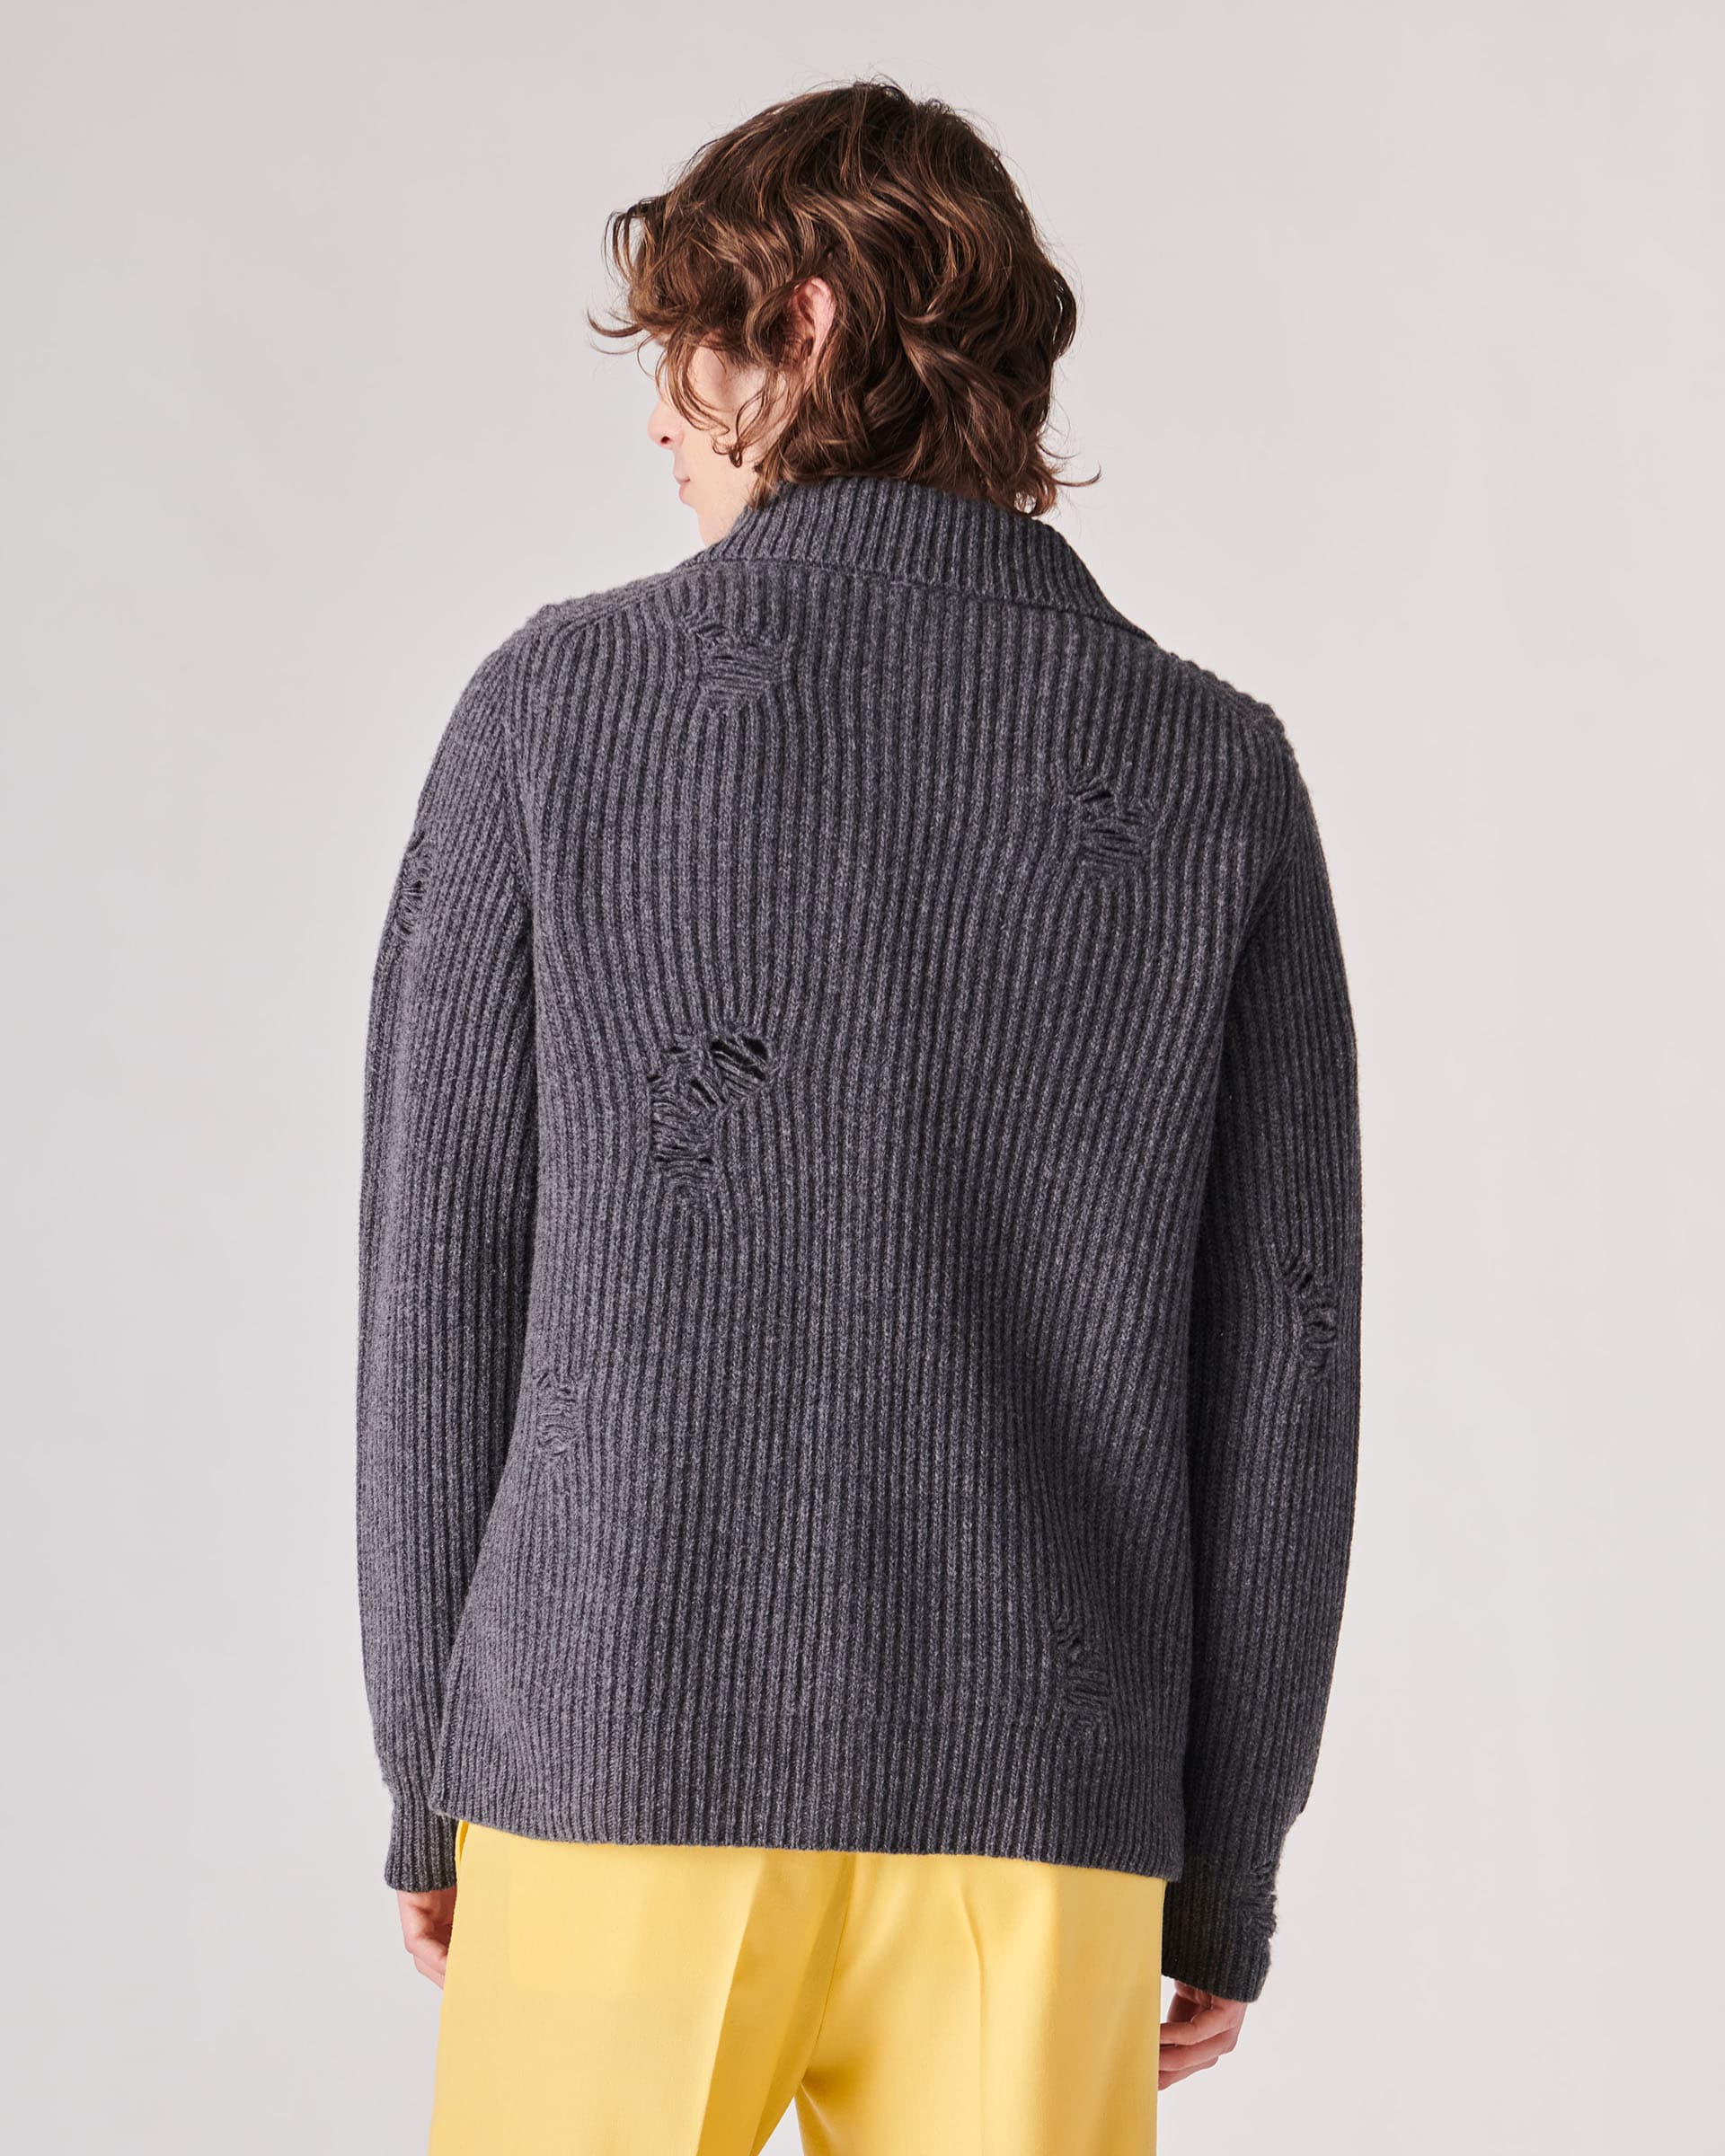 The Market Store | English Knit Jacket With Holes